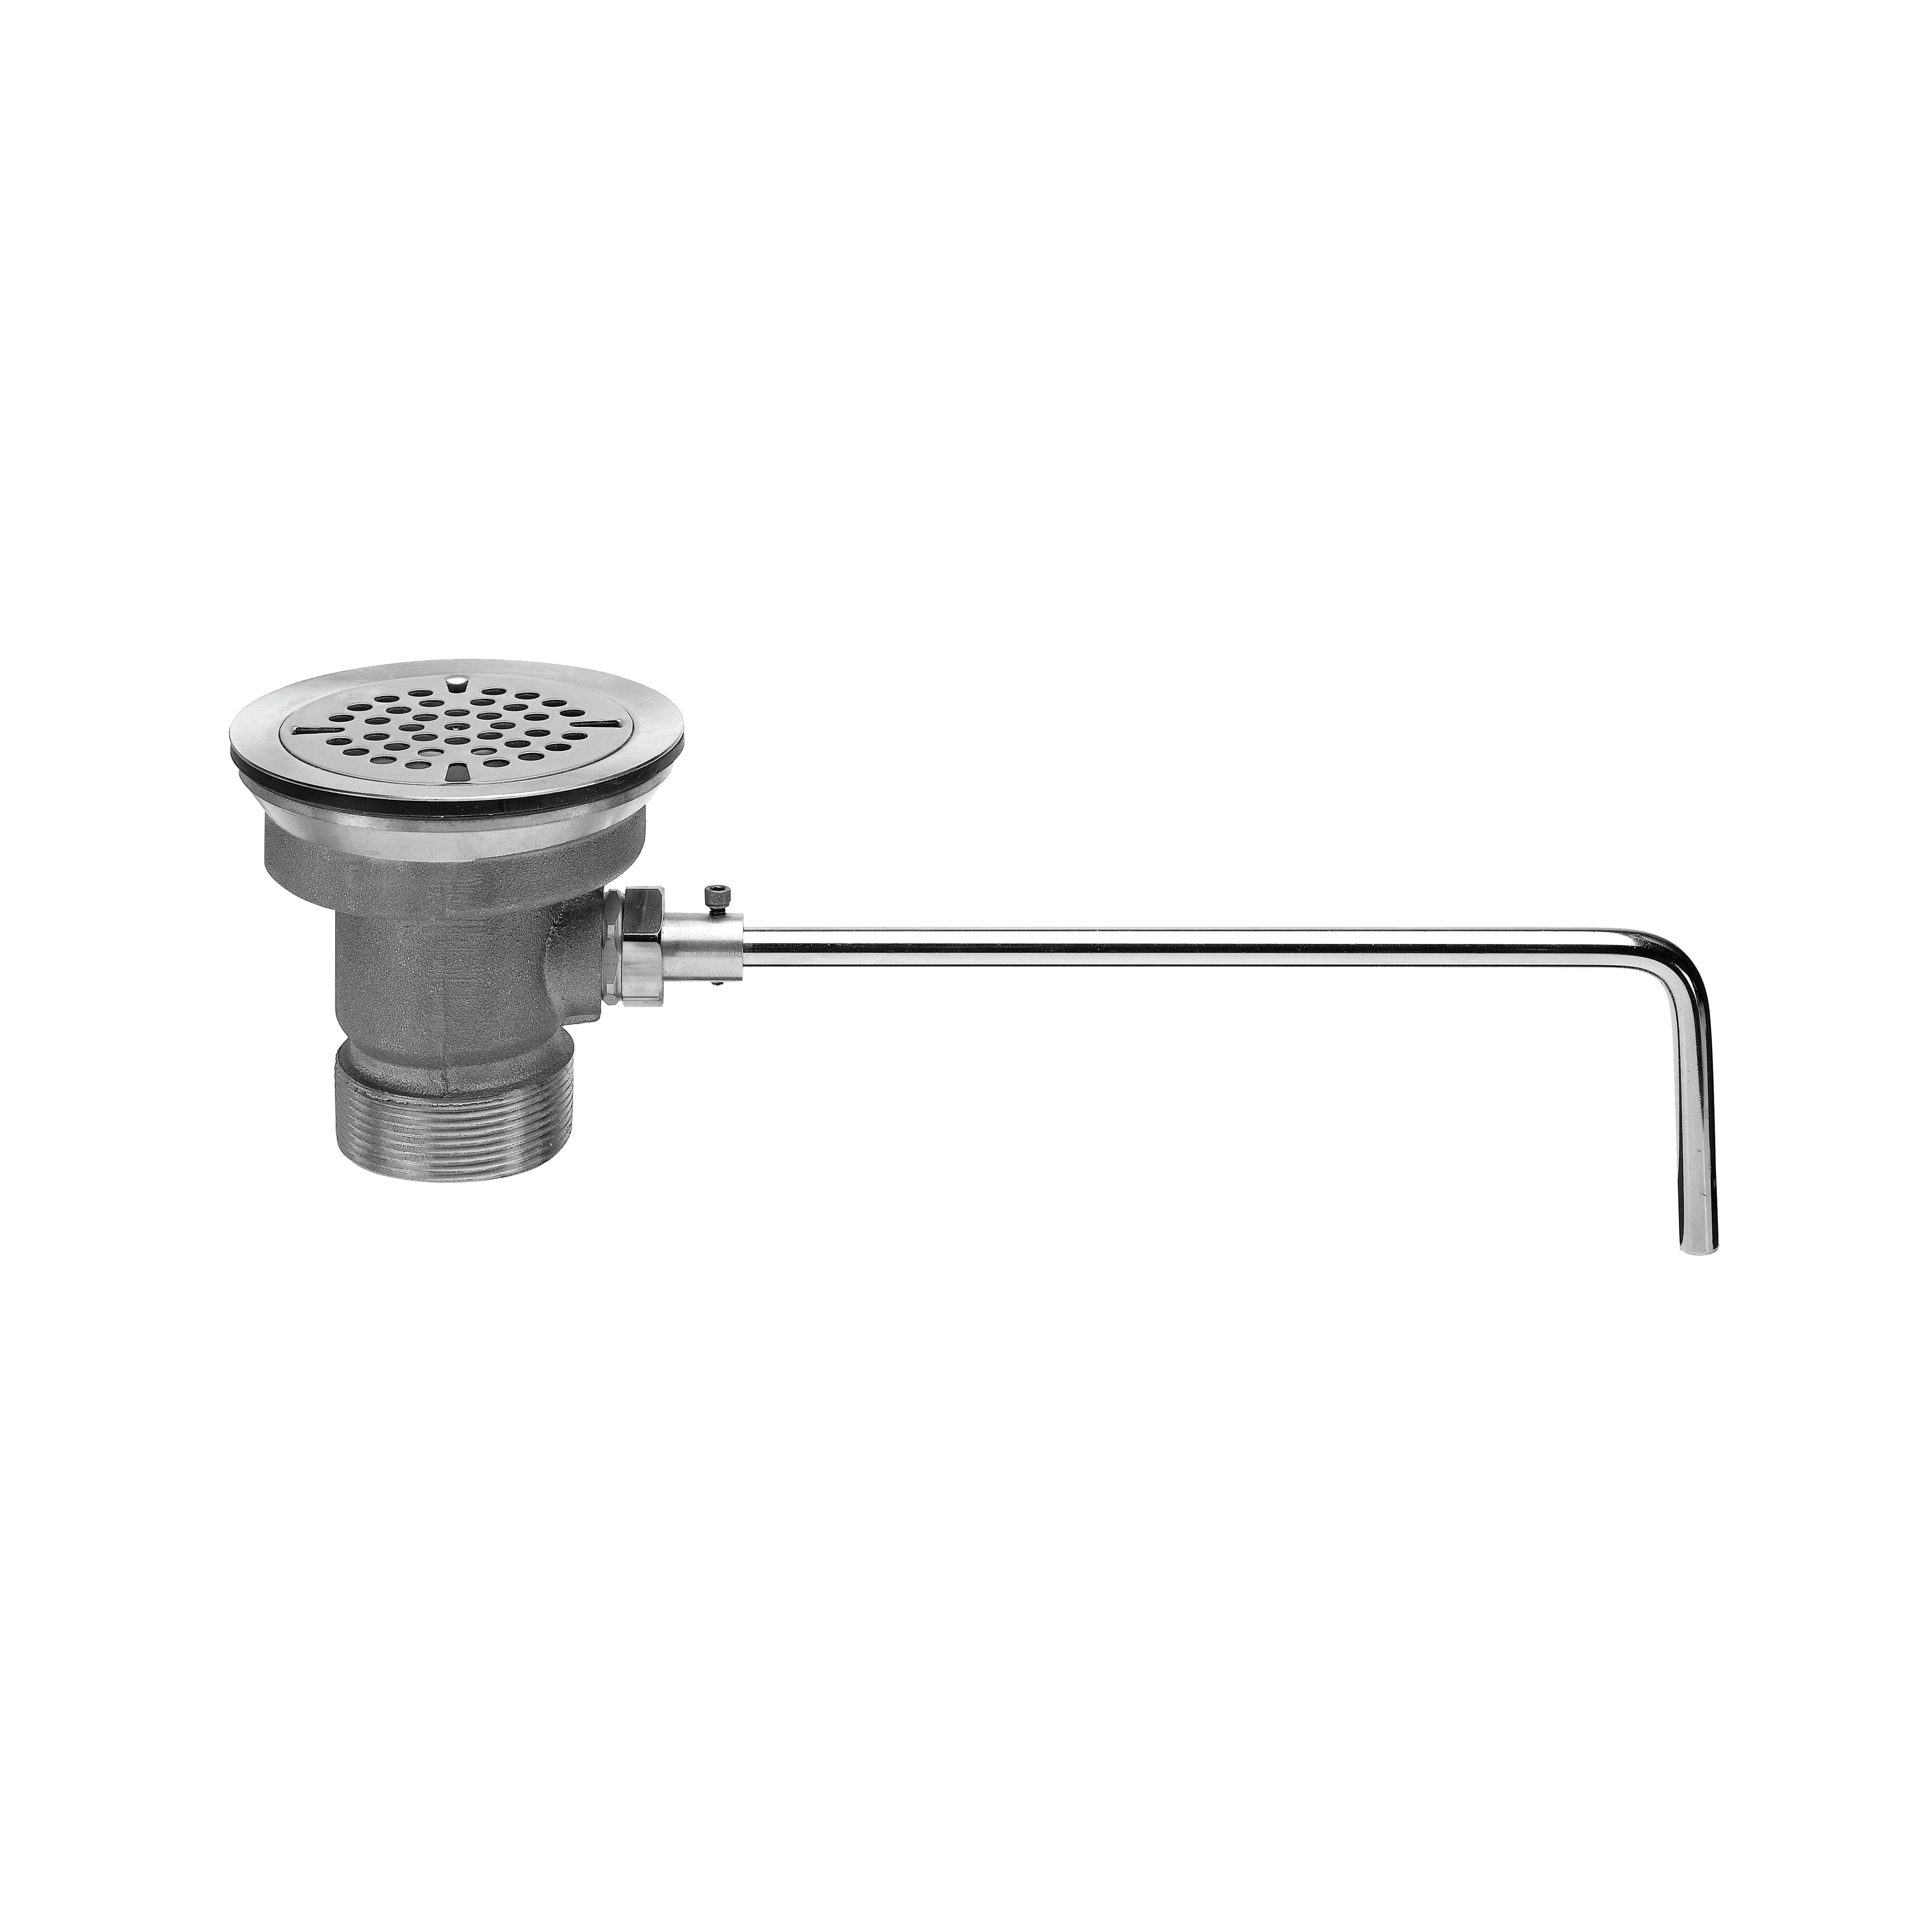 Fisher DrainKing™ 22209 Waste Valve, 1-1/2 x 2 in Nominal, Cast Red Brass Drain, Includes Lift Rod: No